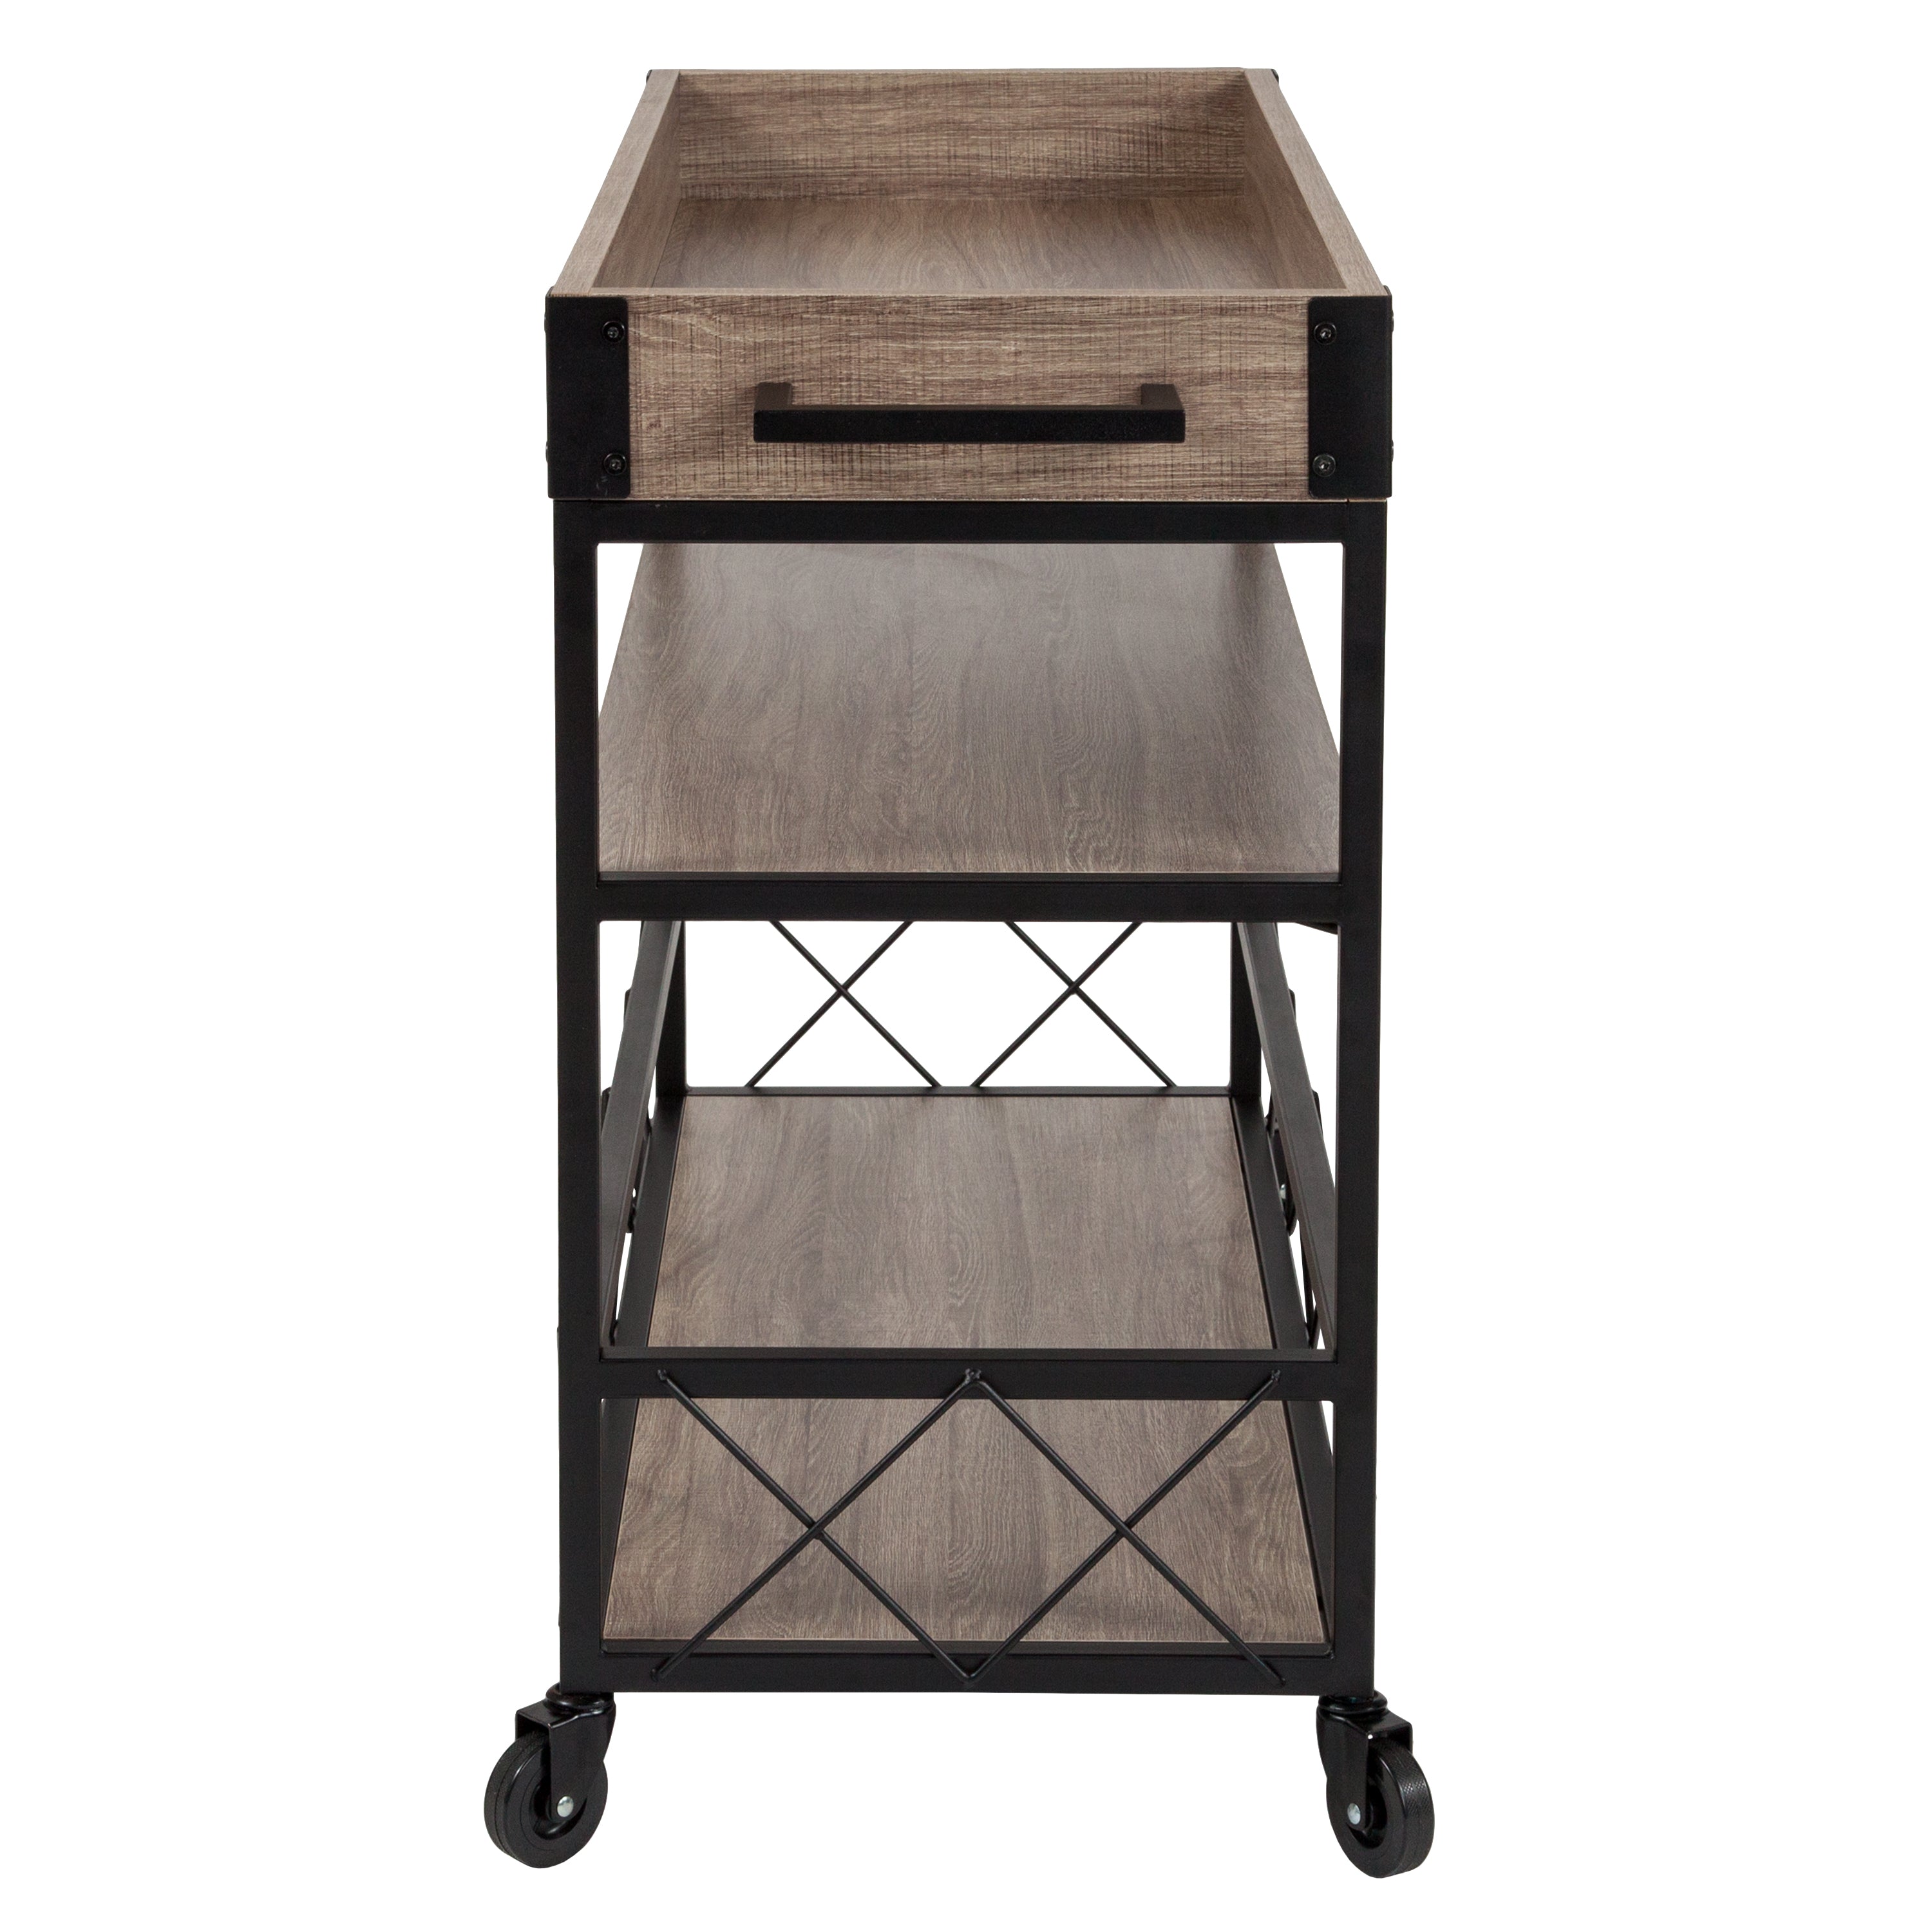 Buckhead Distressed Wood and Iron Kitchen Serving and Bar Cart with Wine Glass Holders-Serving Cart-Flash Furniture-Wall2Wall Furnishings